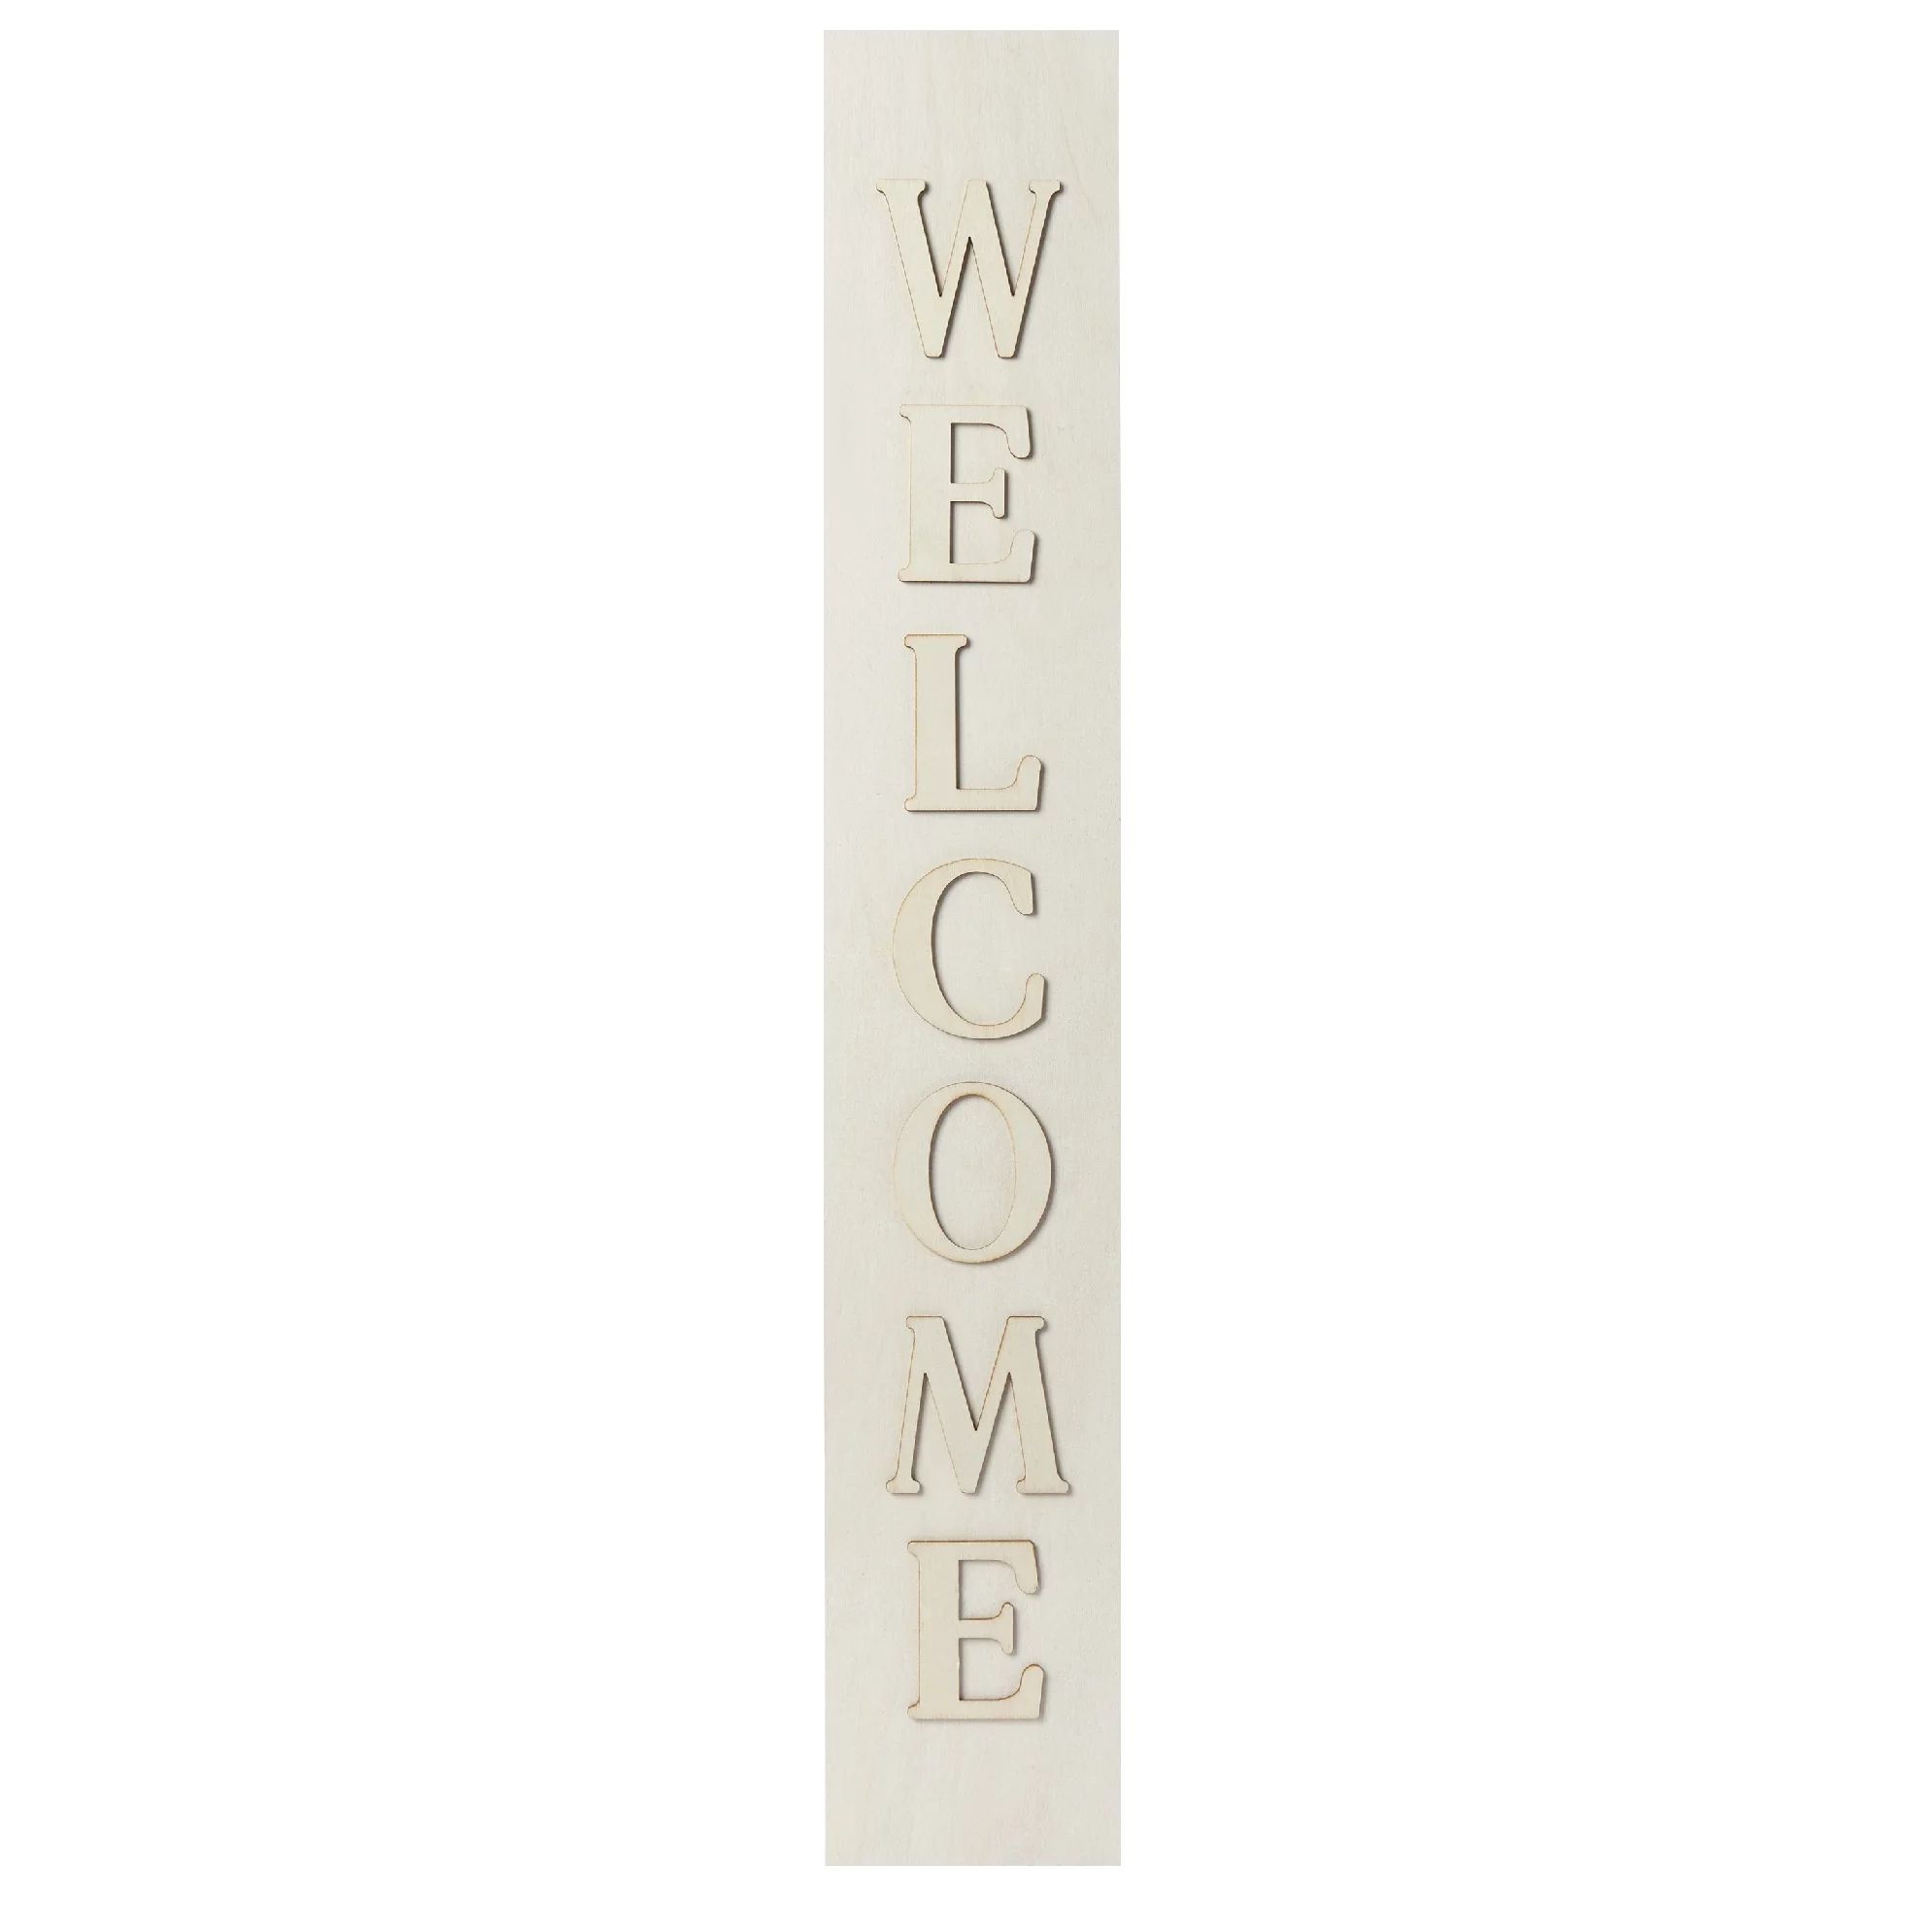 Plaid Unpainted Wood Surfaces Porch Sign with Layered Letters, Welcome | Walmart (US)